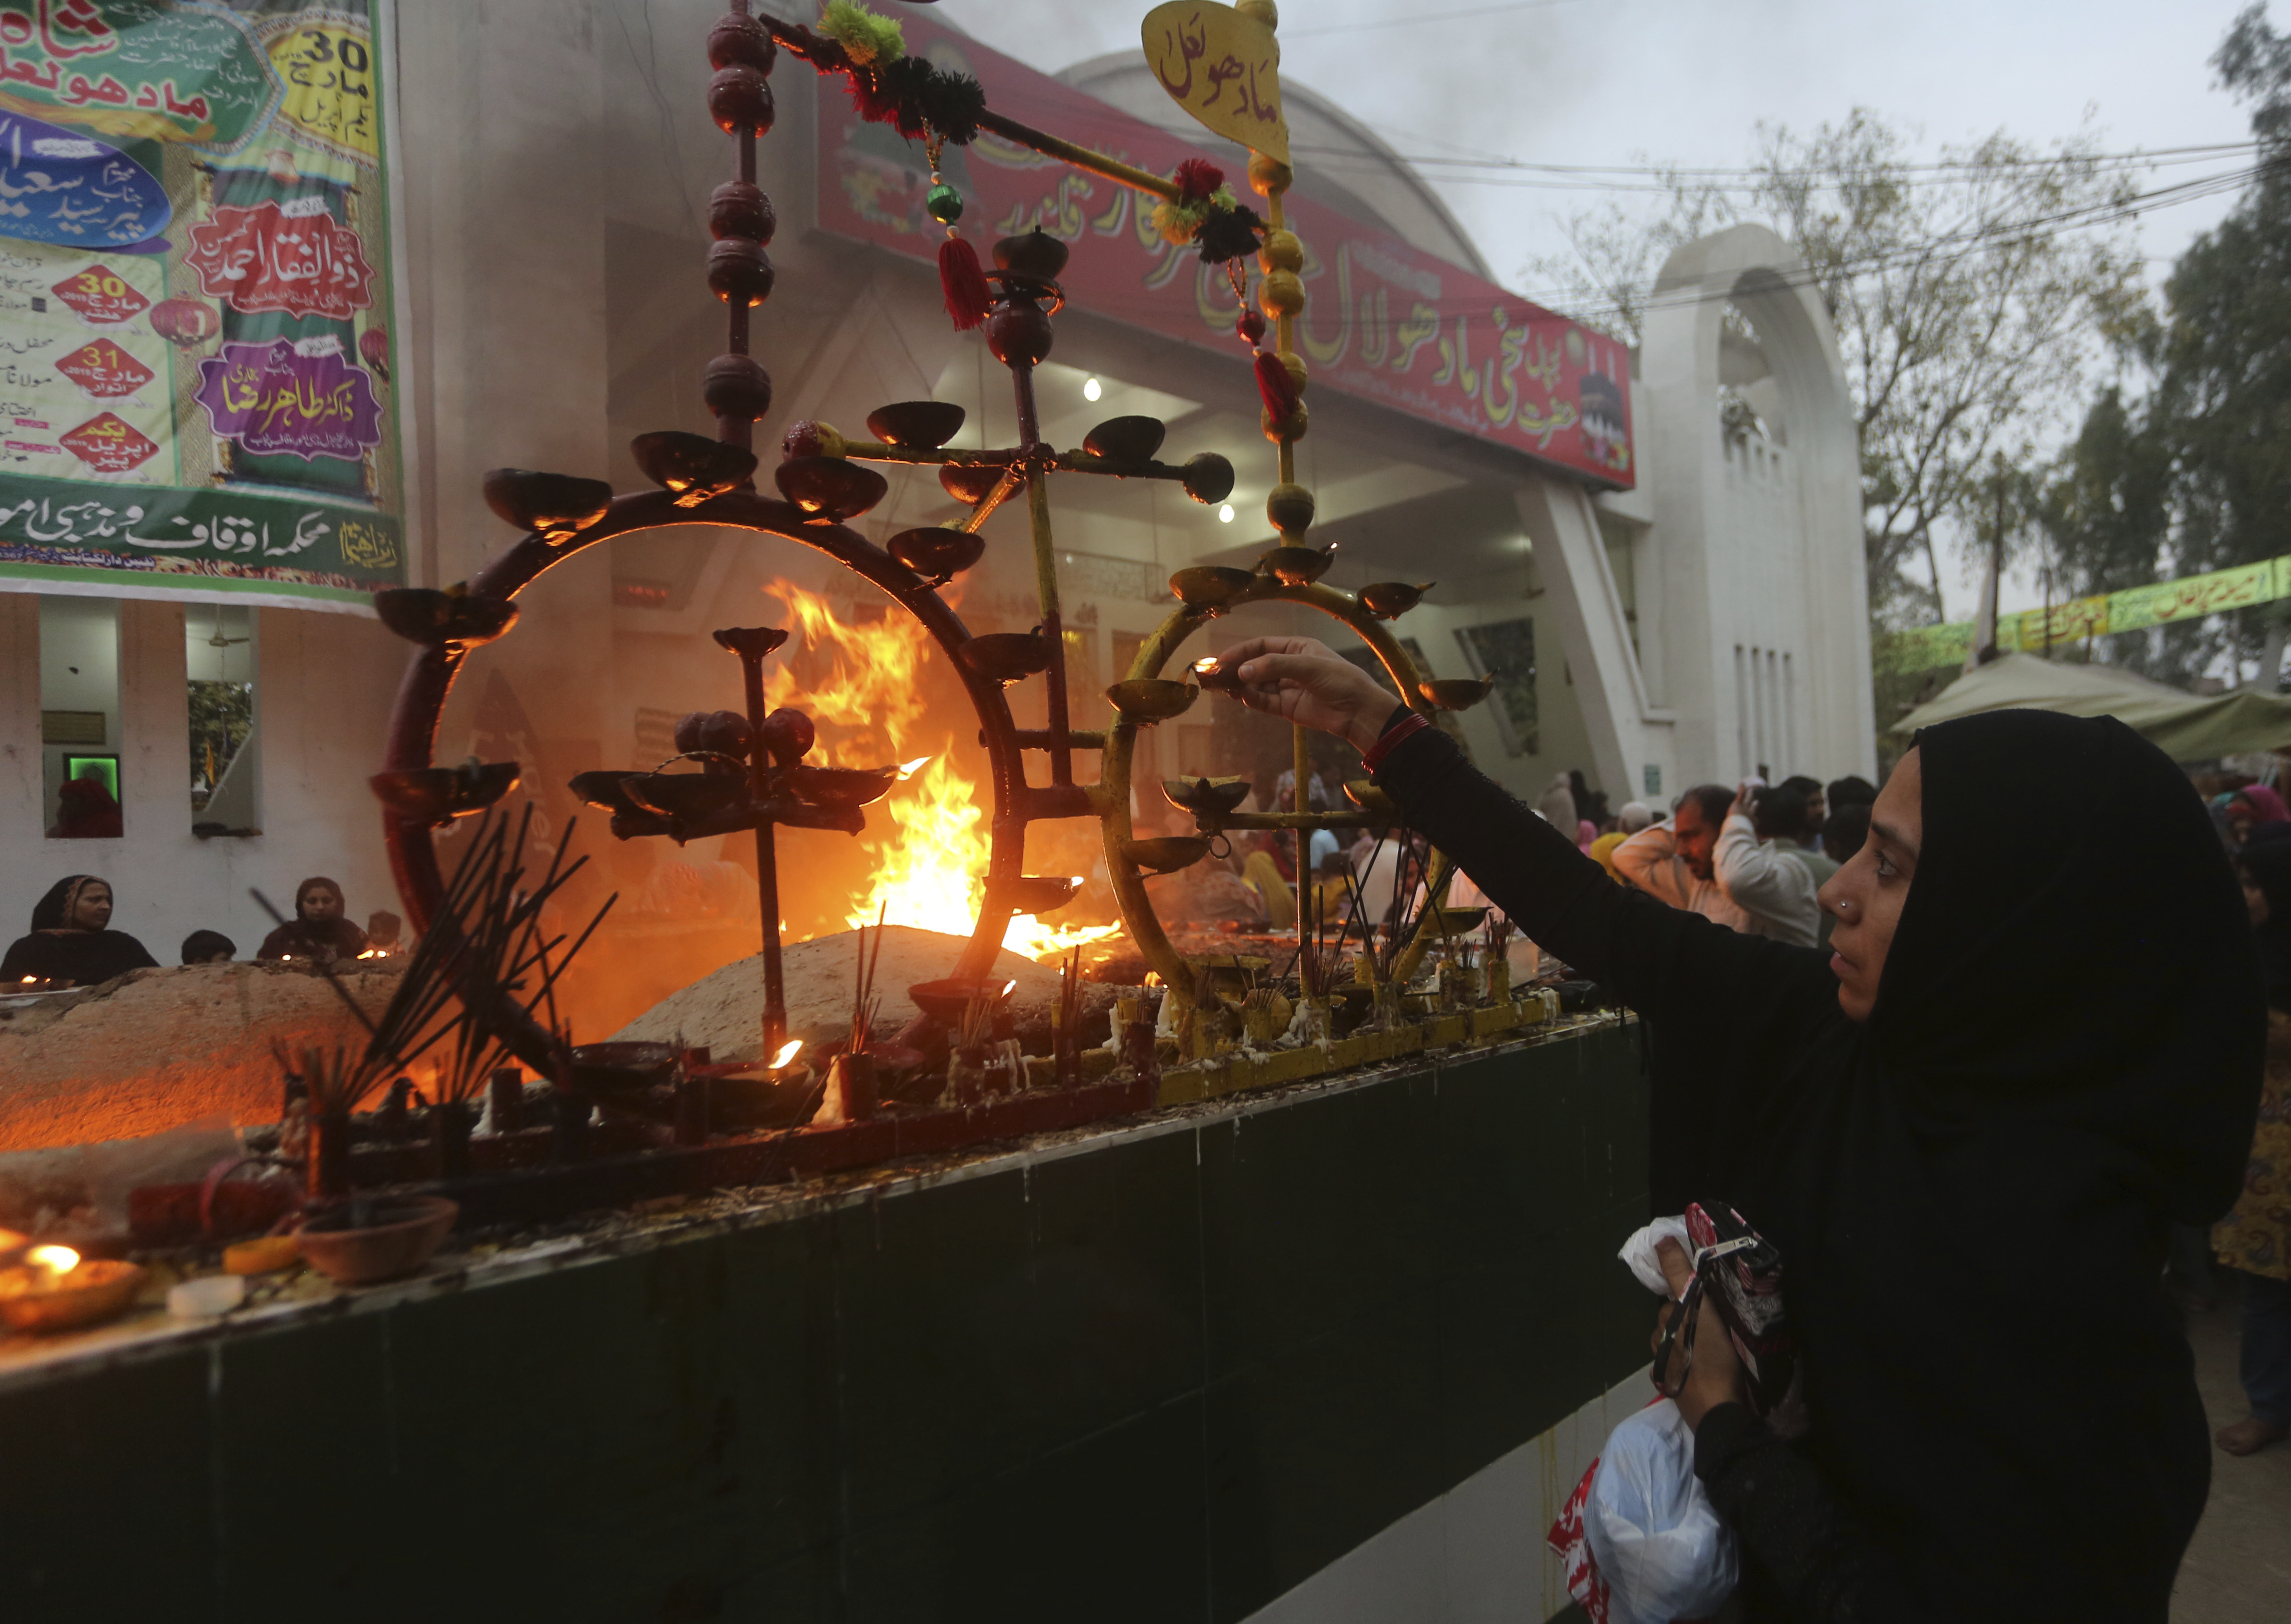 A Pakistani pilgrim lights earthen lamps at a shrine in Lahore, Pakistan, Thursday, March 28, 2019.  People traditionally visit shrines on Thursdays and Fridays to light oil lamps, incense sticks and pray to get their wishes fulfilled. (K.M. Chaudhry)